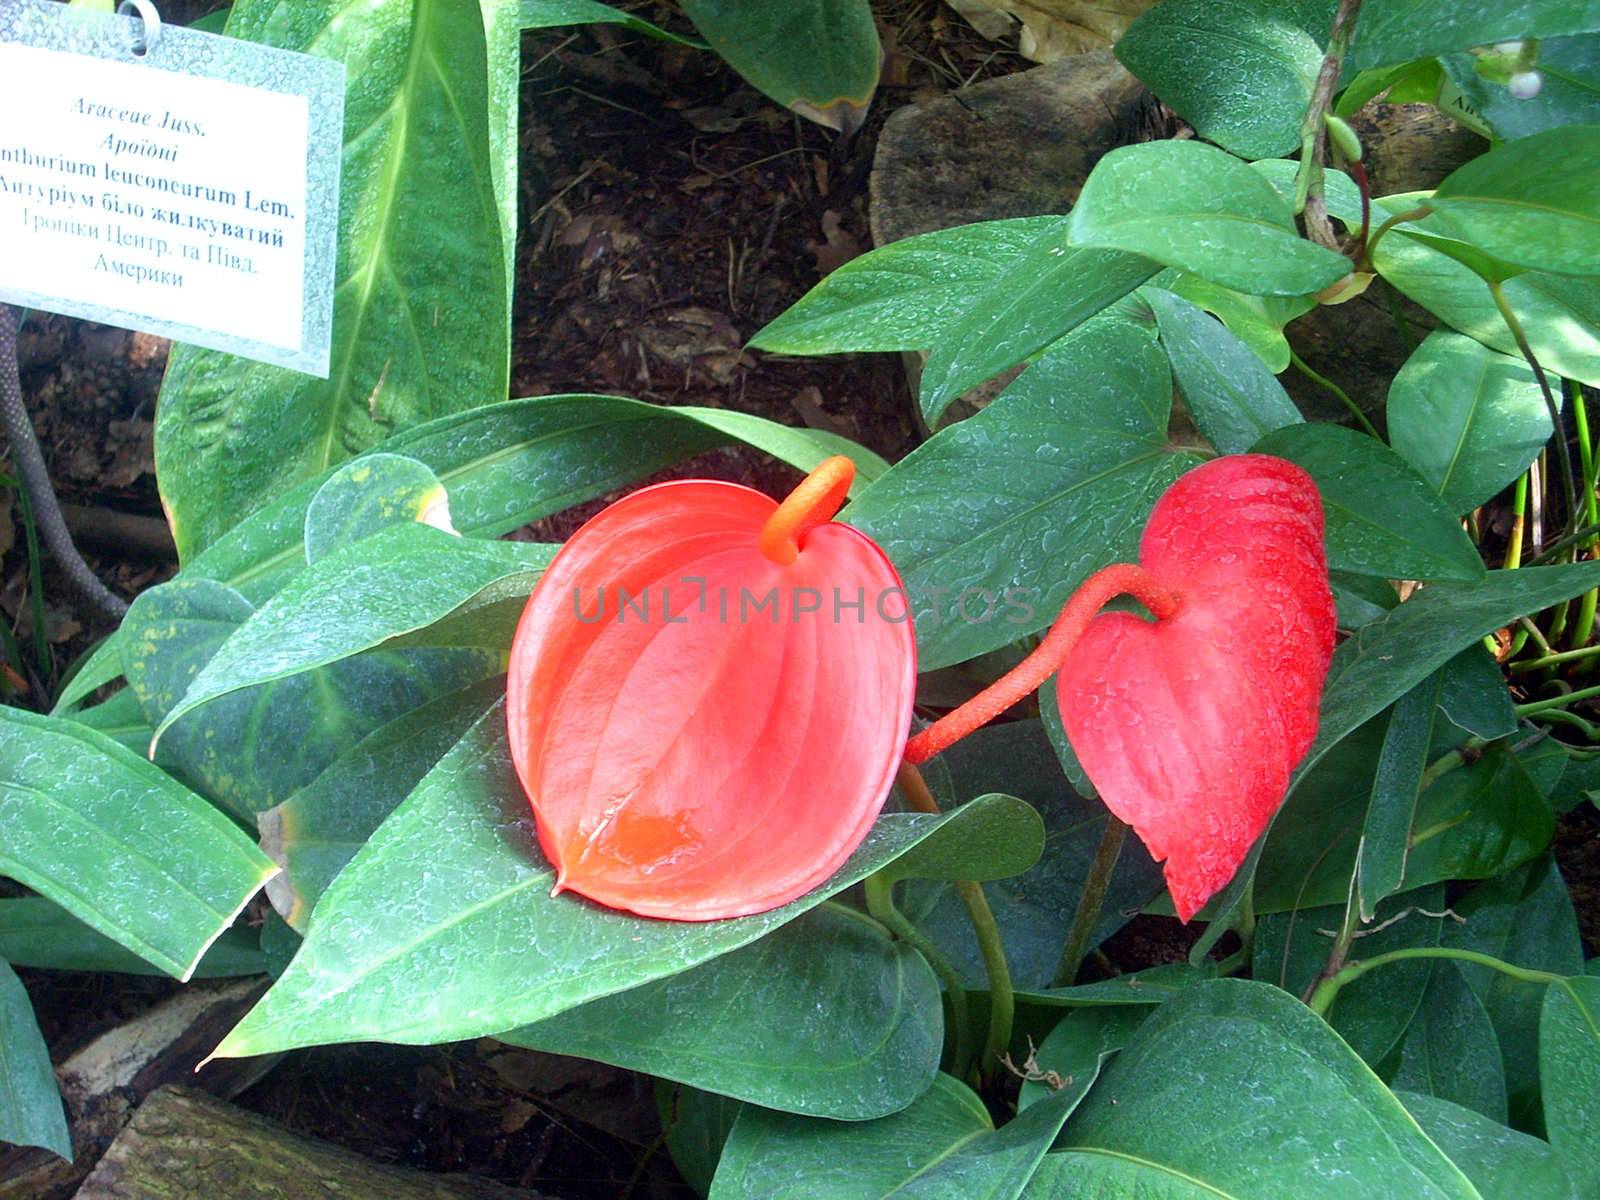 Anthurium in the greenhouse